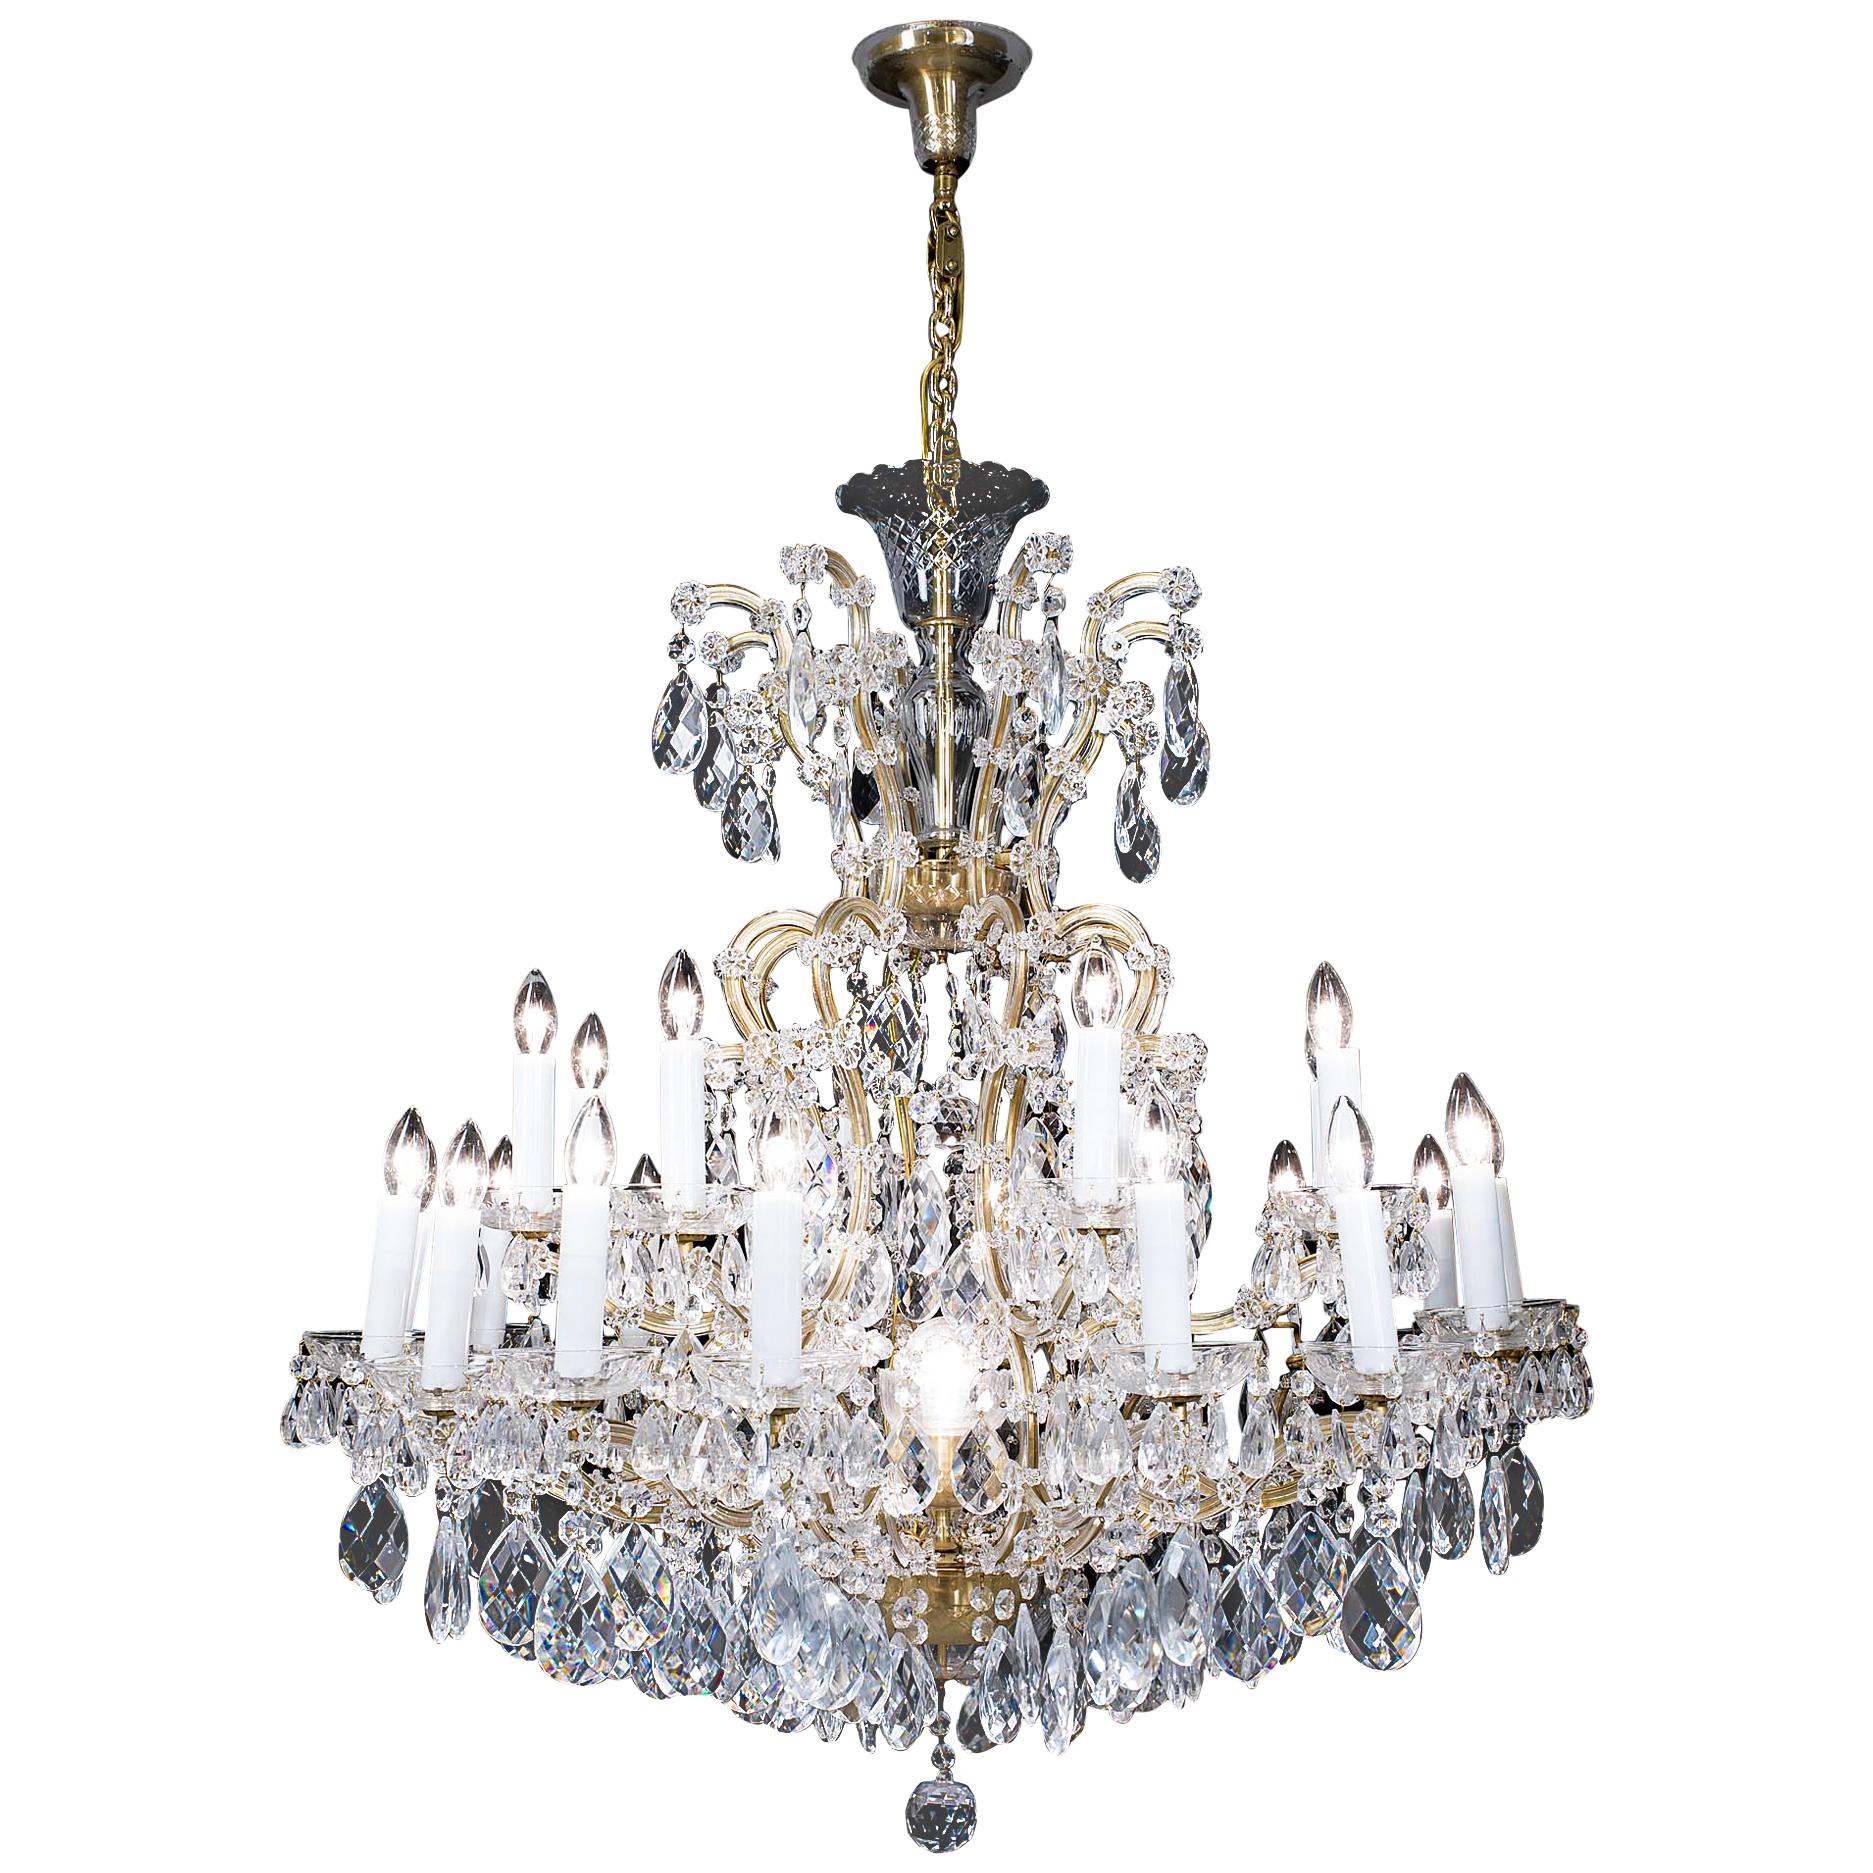 Large Two-Tier Glass and Brass Neoclassical Chandelier